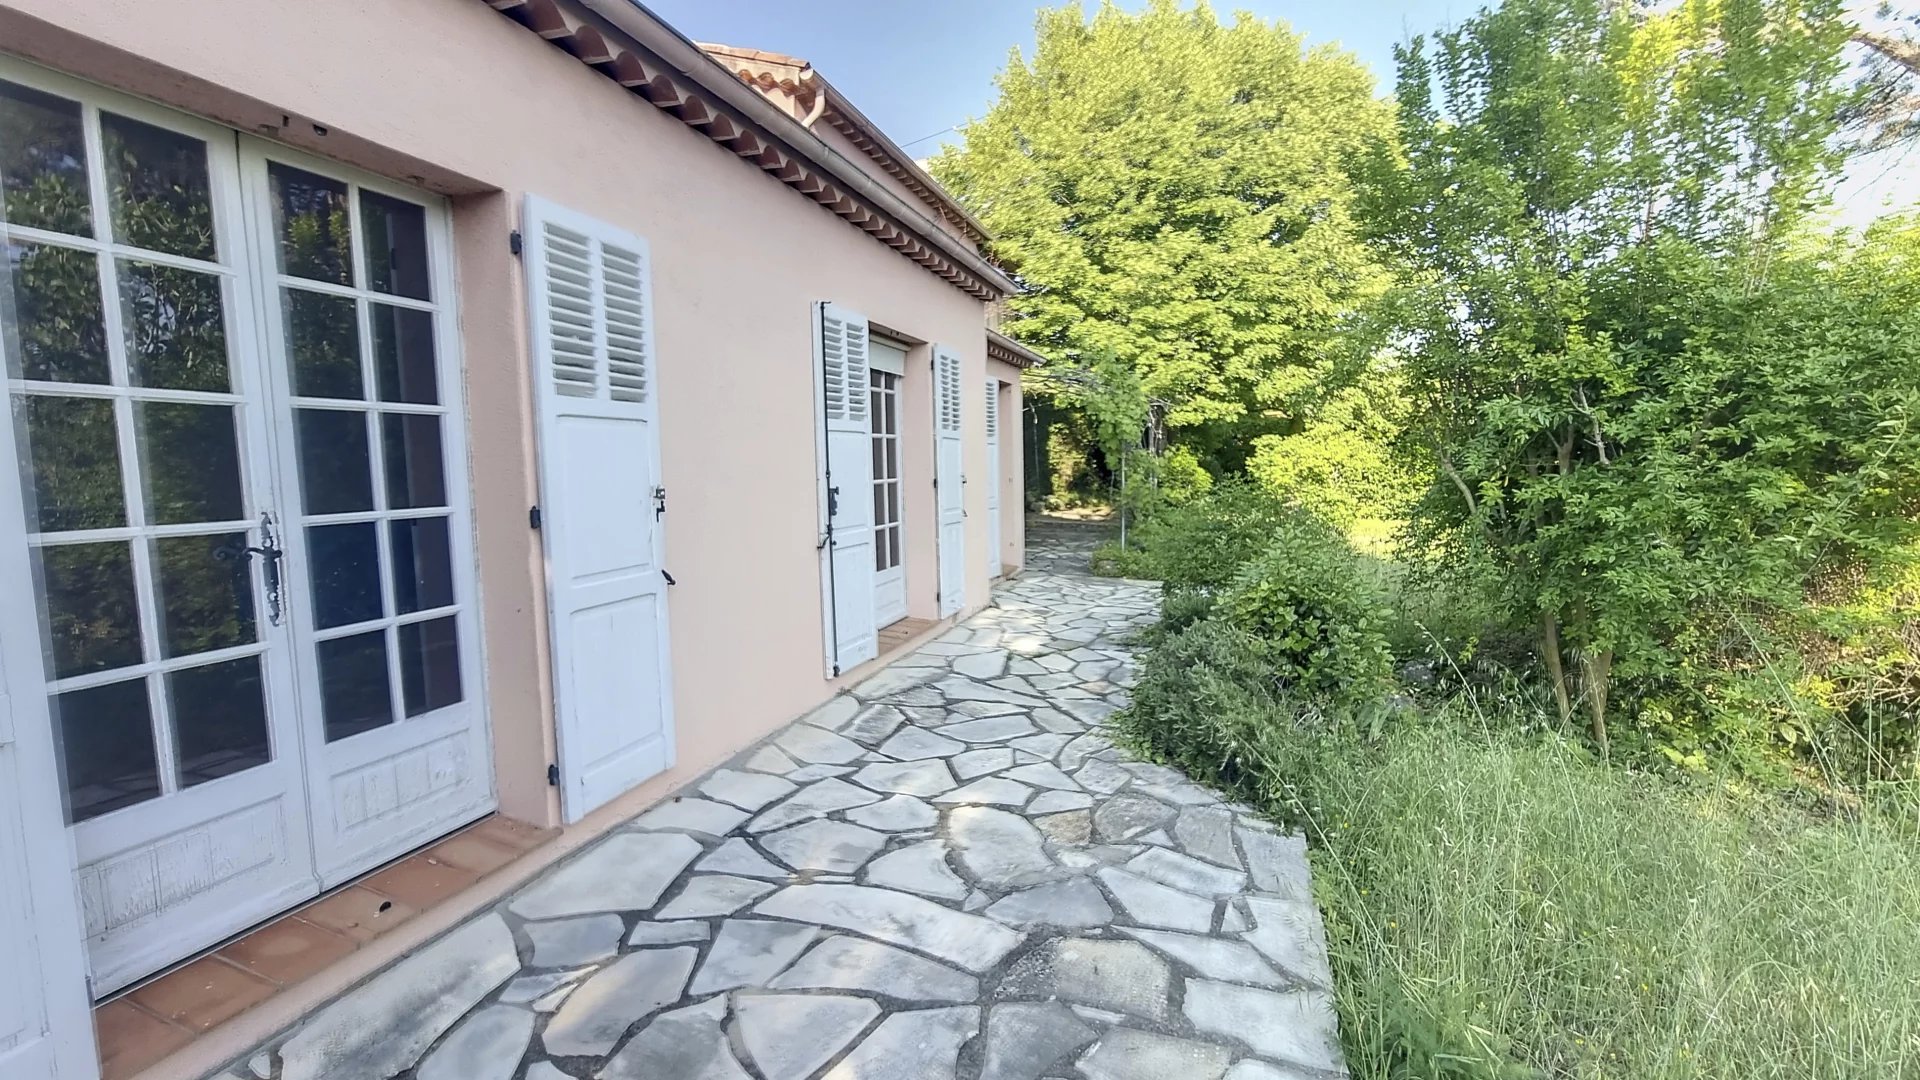 HOUSE 125m² ON 980M² OF LAND IN QUIET GRASSE